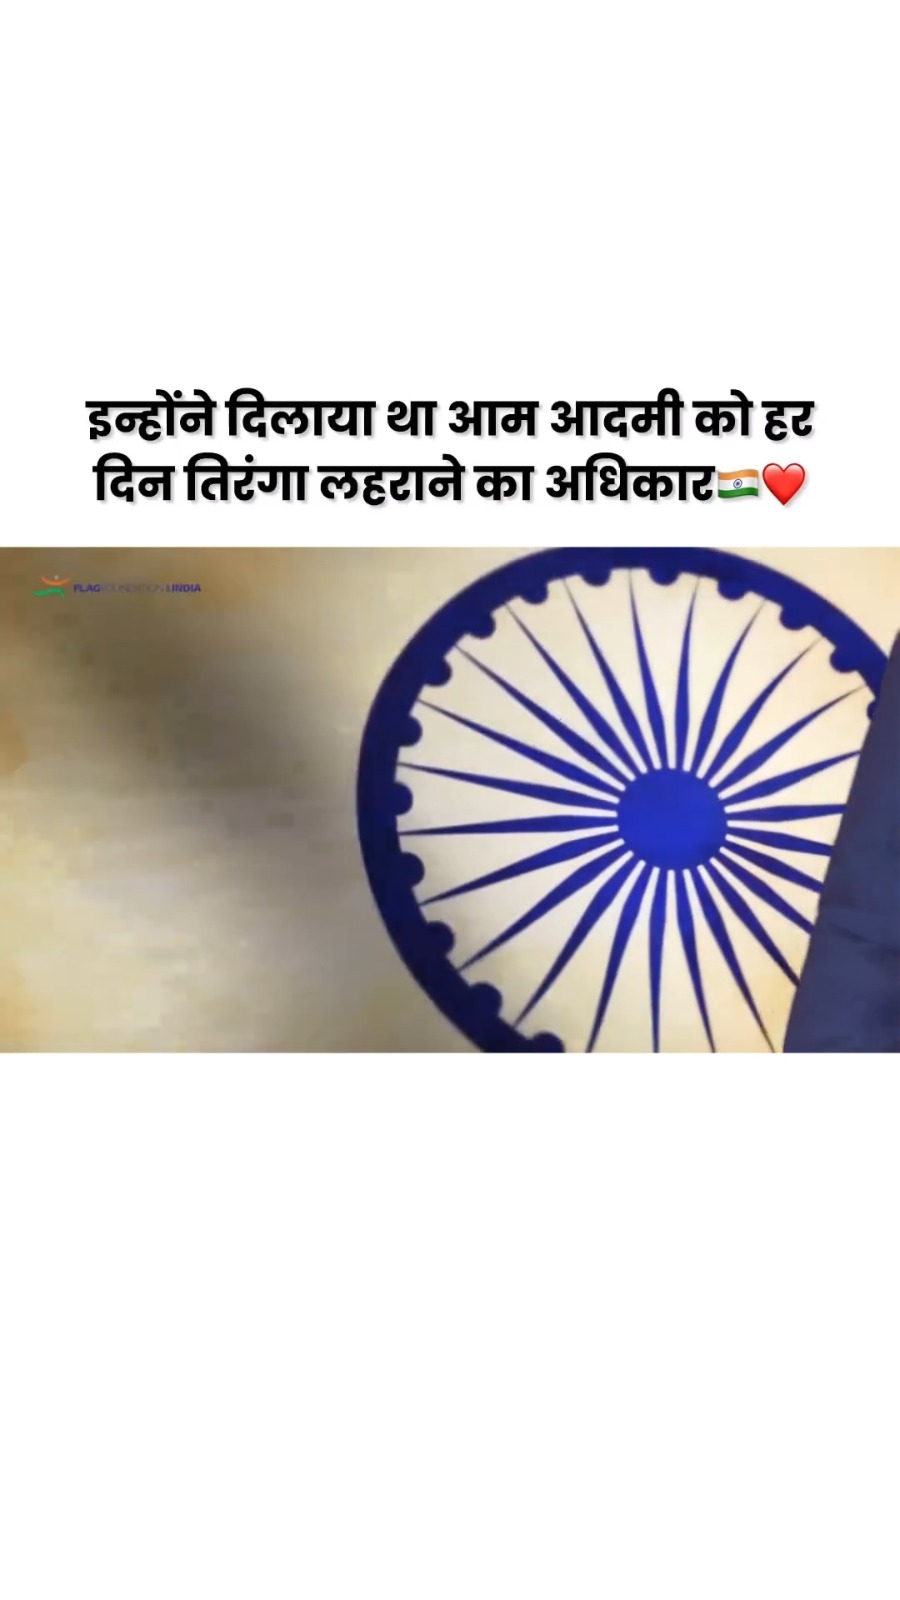 Twenty years ago, on January 23, 2004, Mr. Naveen Jindal won a decade-long legal battle that granted every Indian citizen the right to hoist the national flag 365 days a year. Let’s celebrate January 23 as Flag Day.